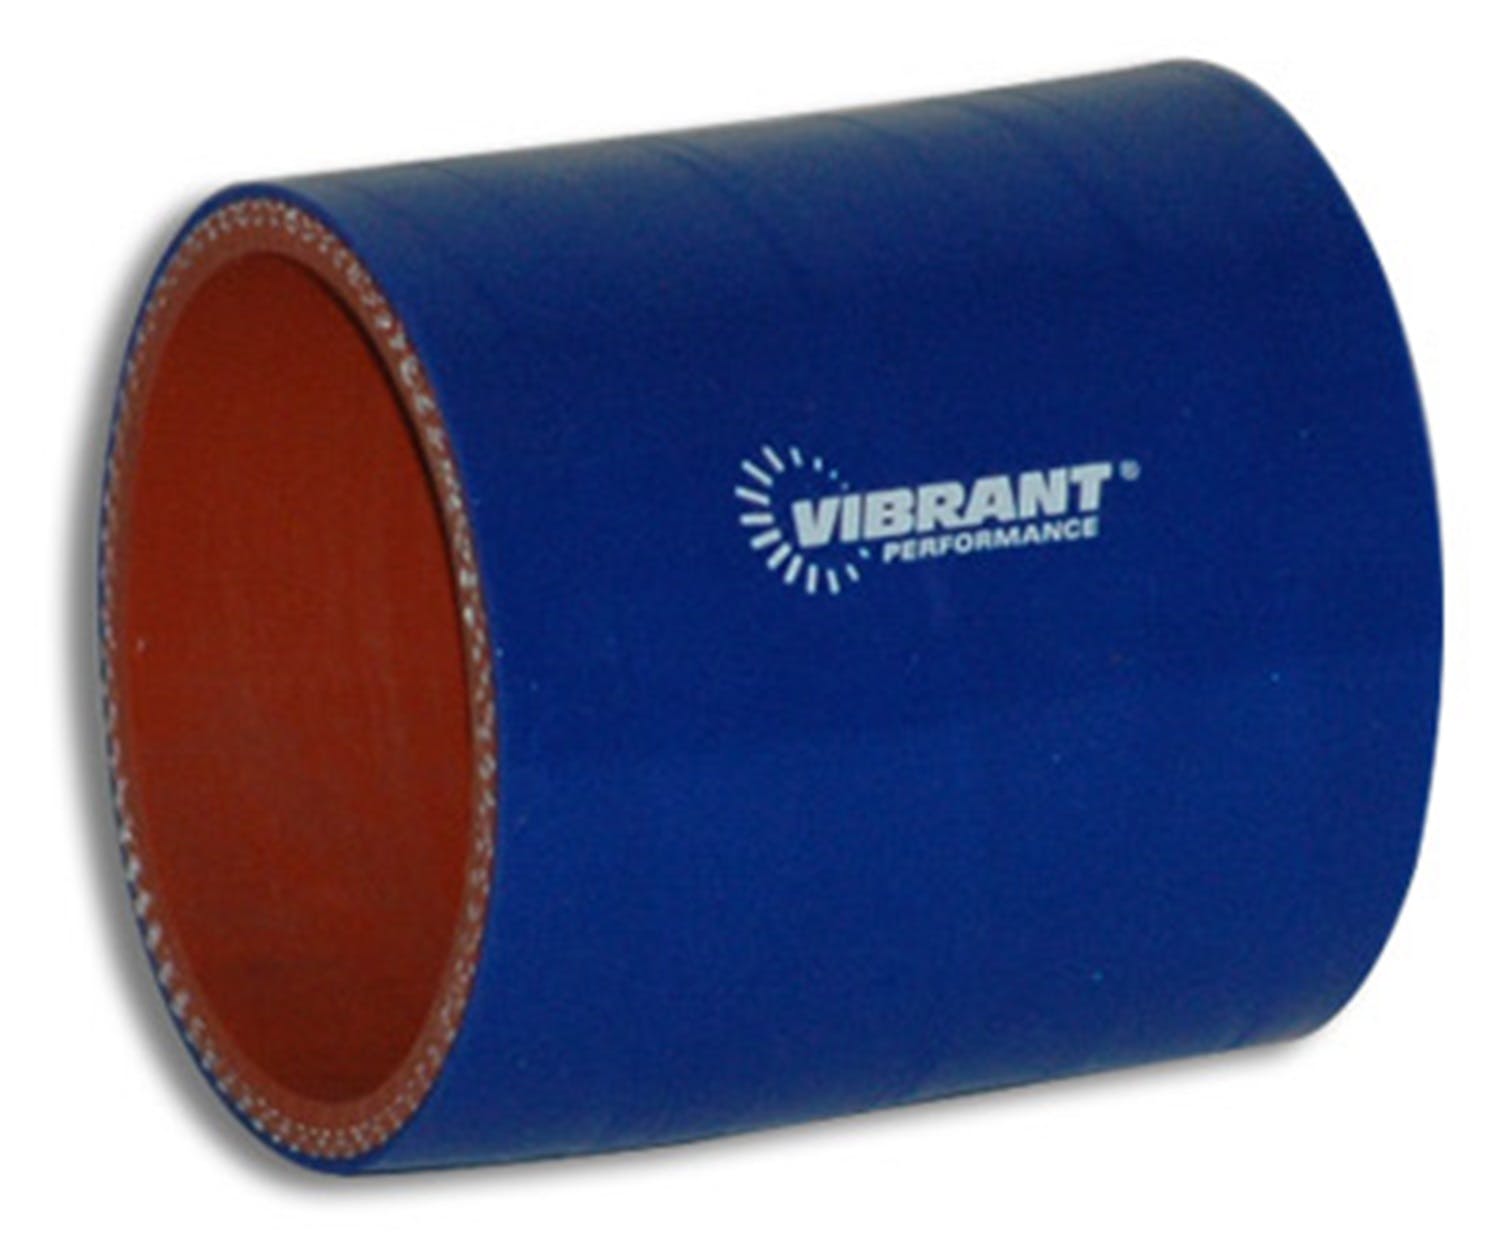 Vibrant Performance 2706B 4 Ply Silicone Sleeve, 2 inch I.D. x 3 inch Long - Blue